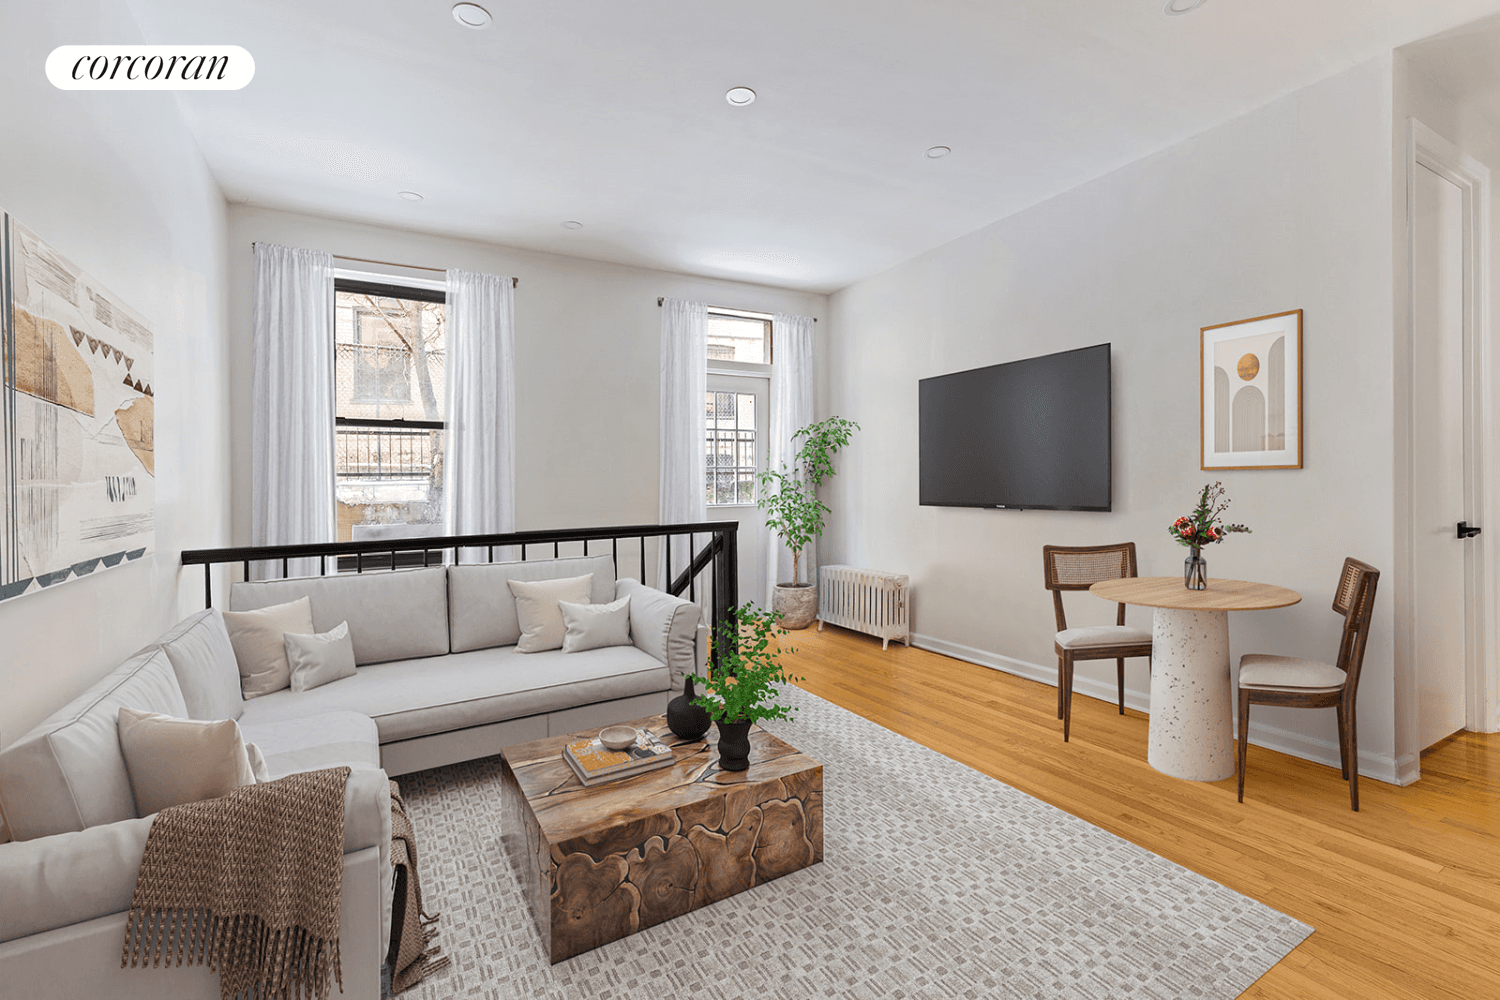 Welcome to the inviting residence at 34 Butler Place, a meticulously maintained, pet friendly condominium nestled in the heart of Prospect Heights.